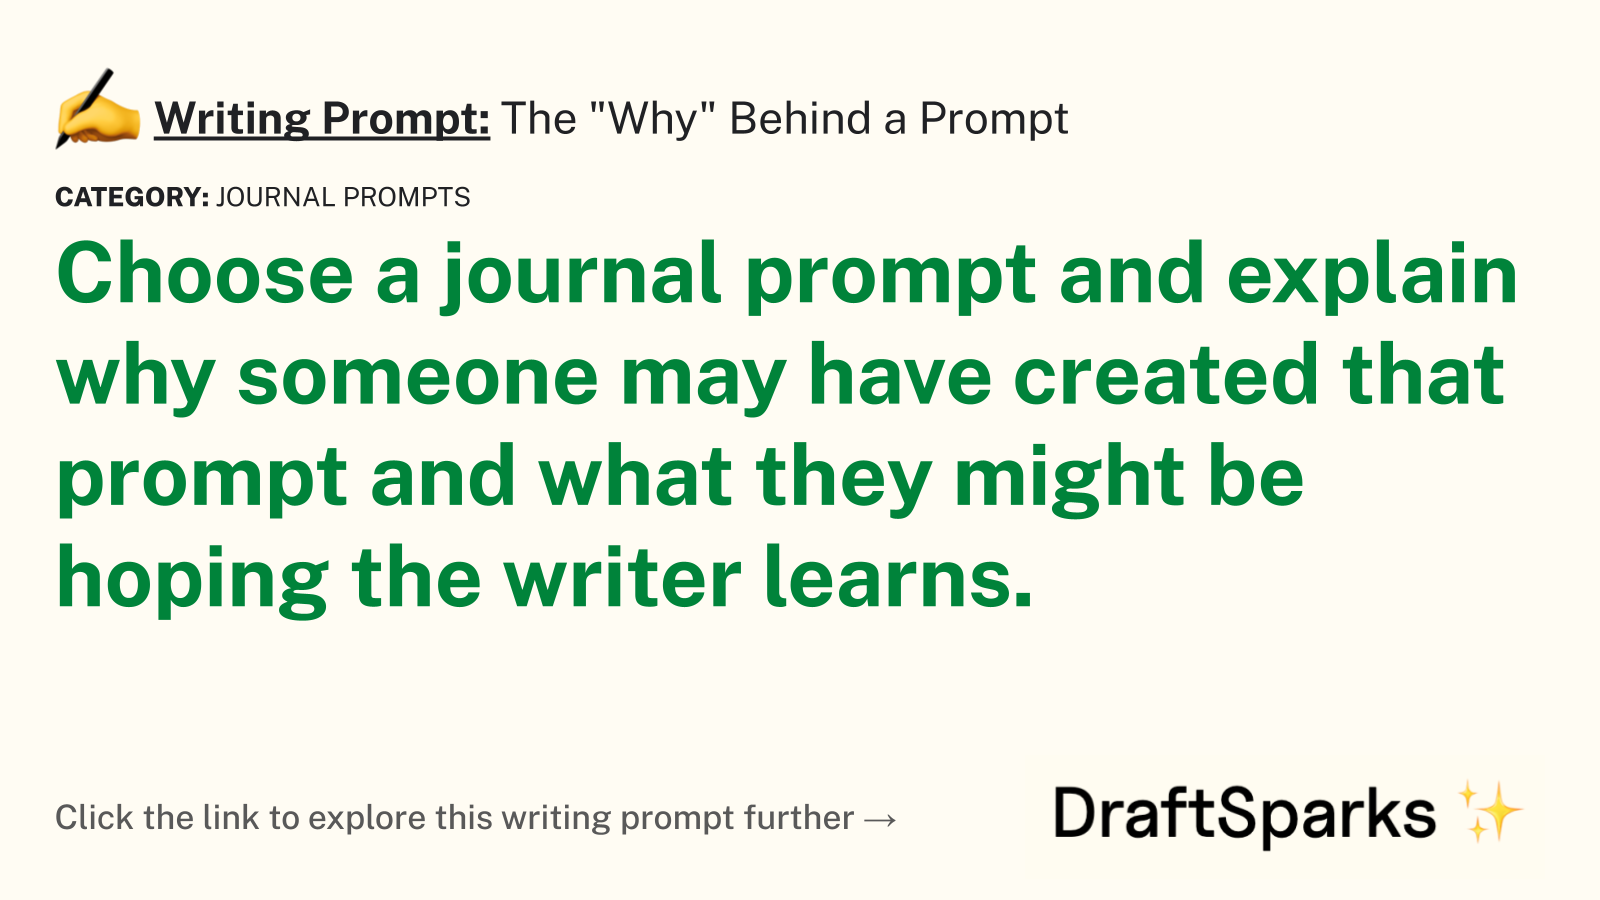 The “Why” Behind a Prompt